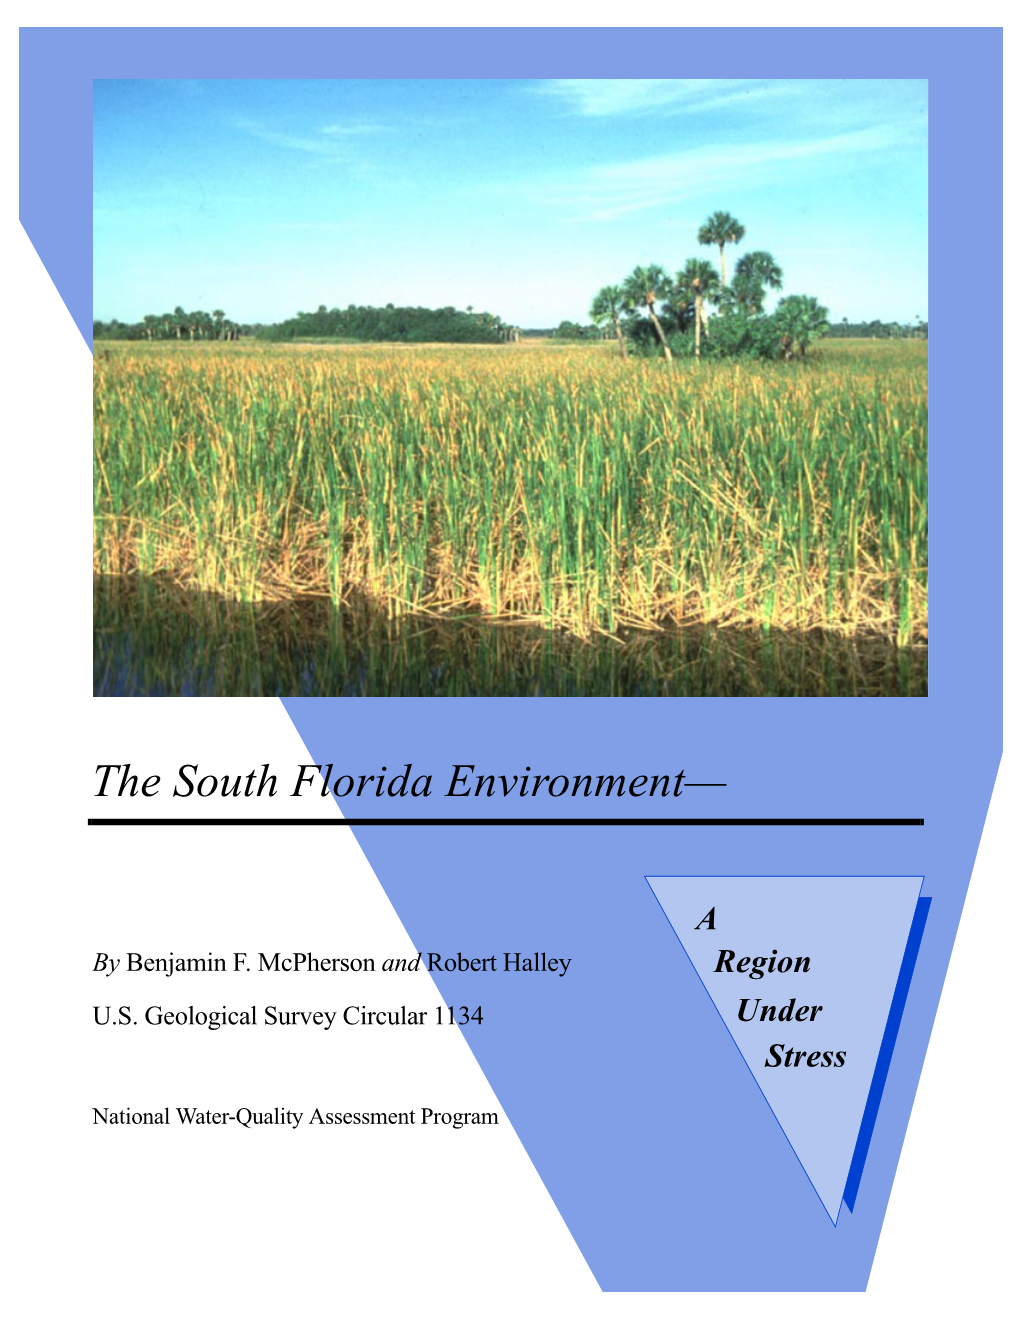 Mcpherson, B.F. and R. Halley. 1996. the South Florida Environment